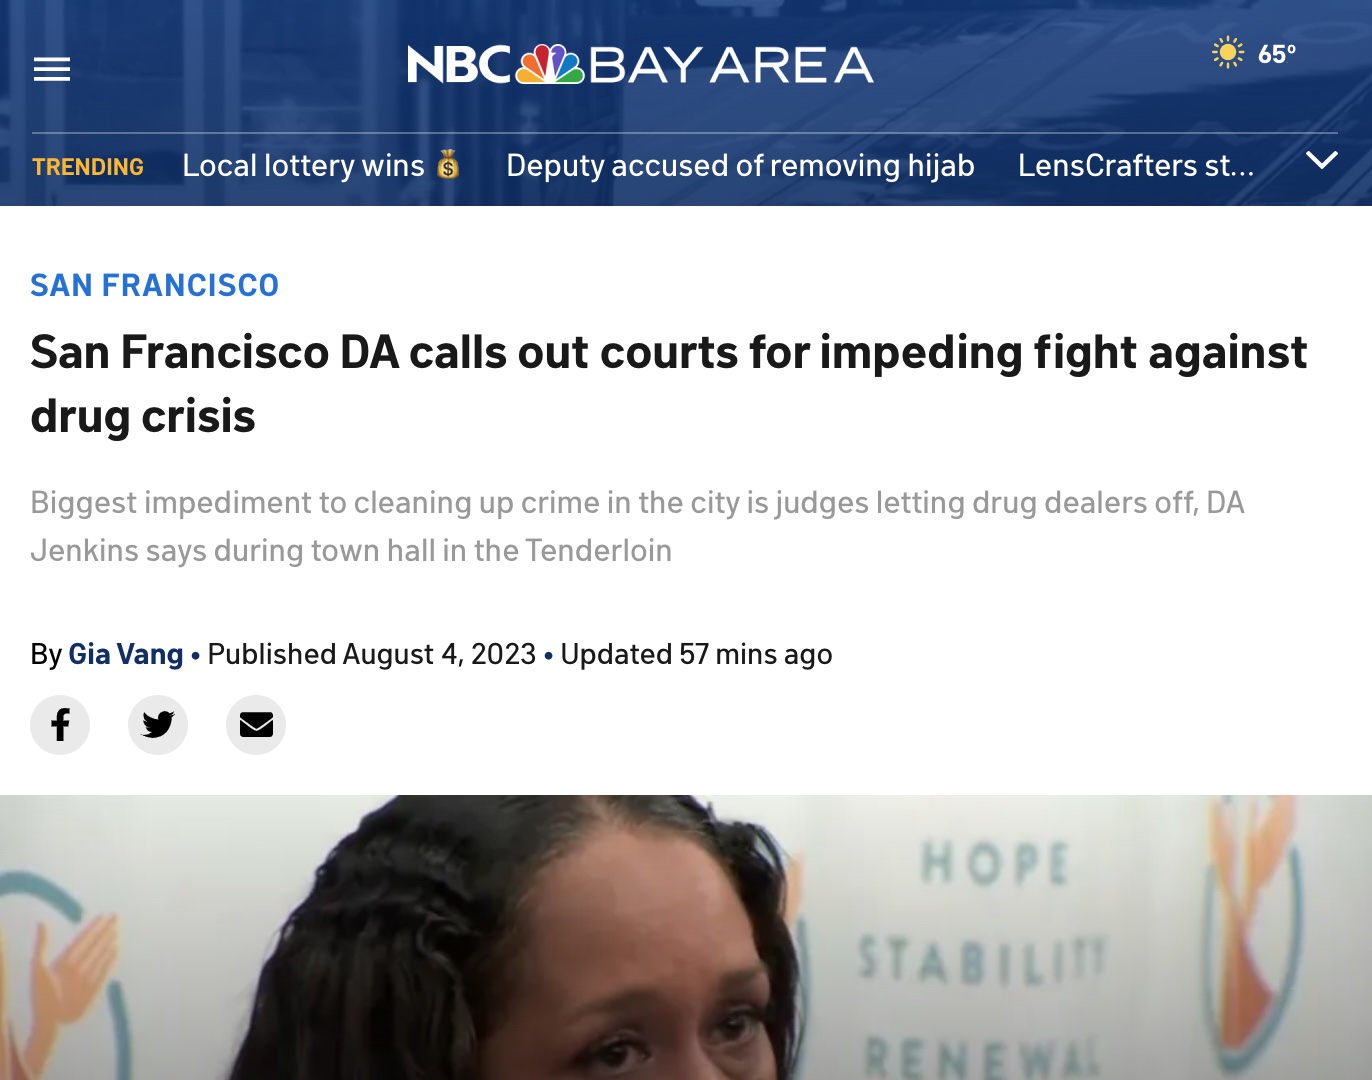 NBC Bay Area: San Francisco DA calls out courts for impeding fight against drug crisis